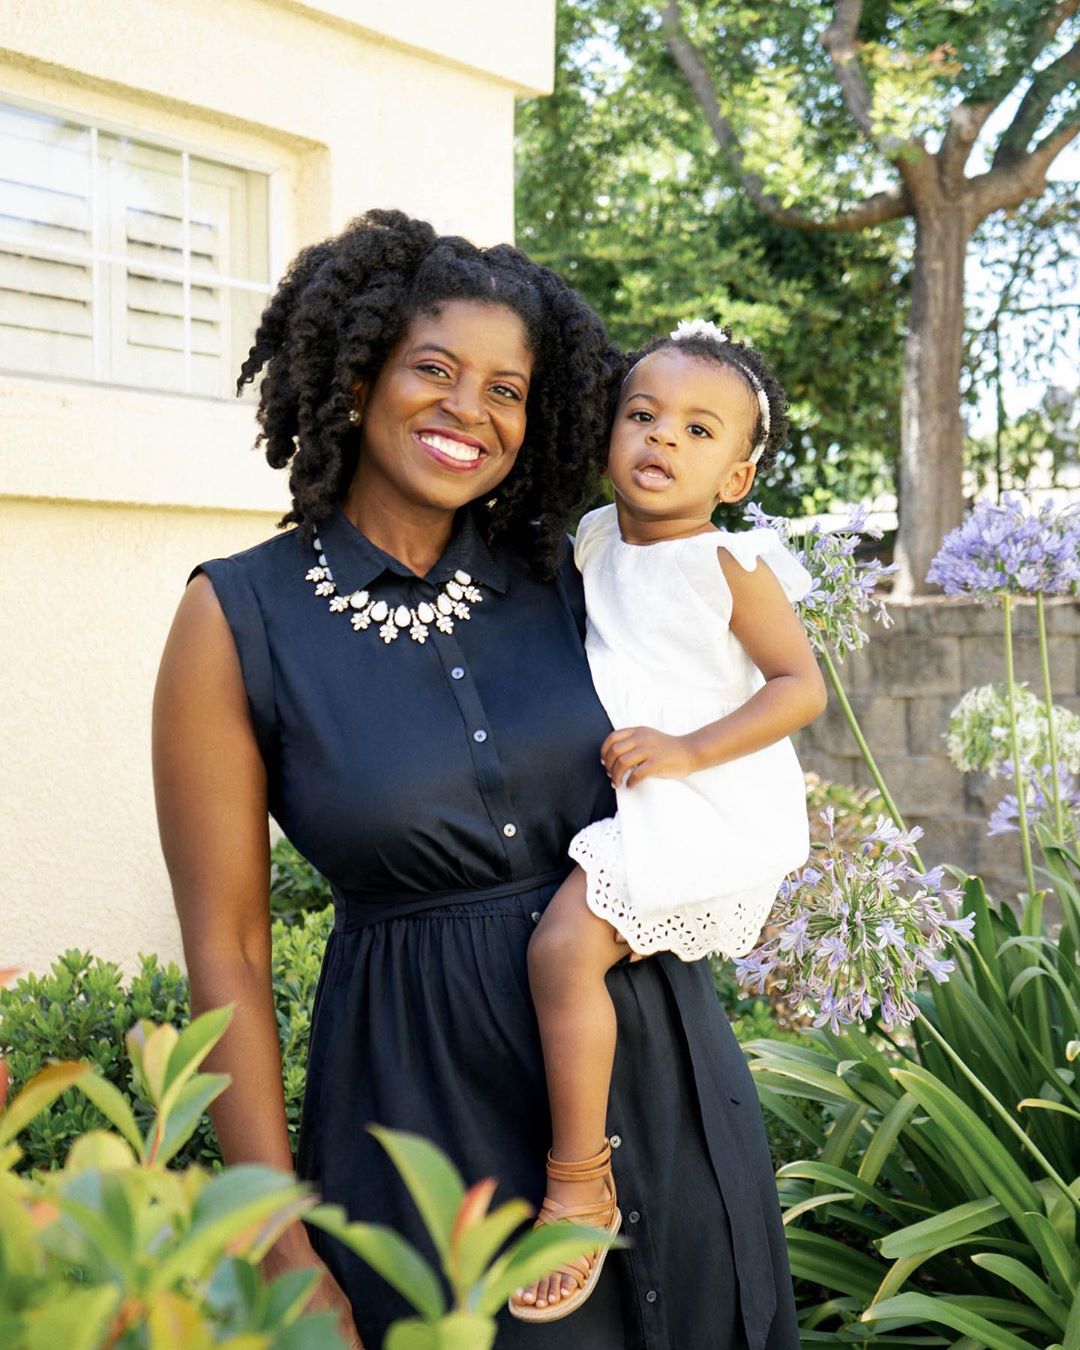 Banana Republic - AMPLIFY VOICES

"Motherhood is exhilarating, exhausting, and enlightening but Black motherhood adds an additional layer of emotions and feelings.  Being a Black mother brings unique...